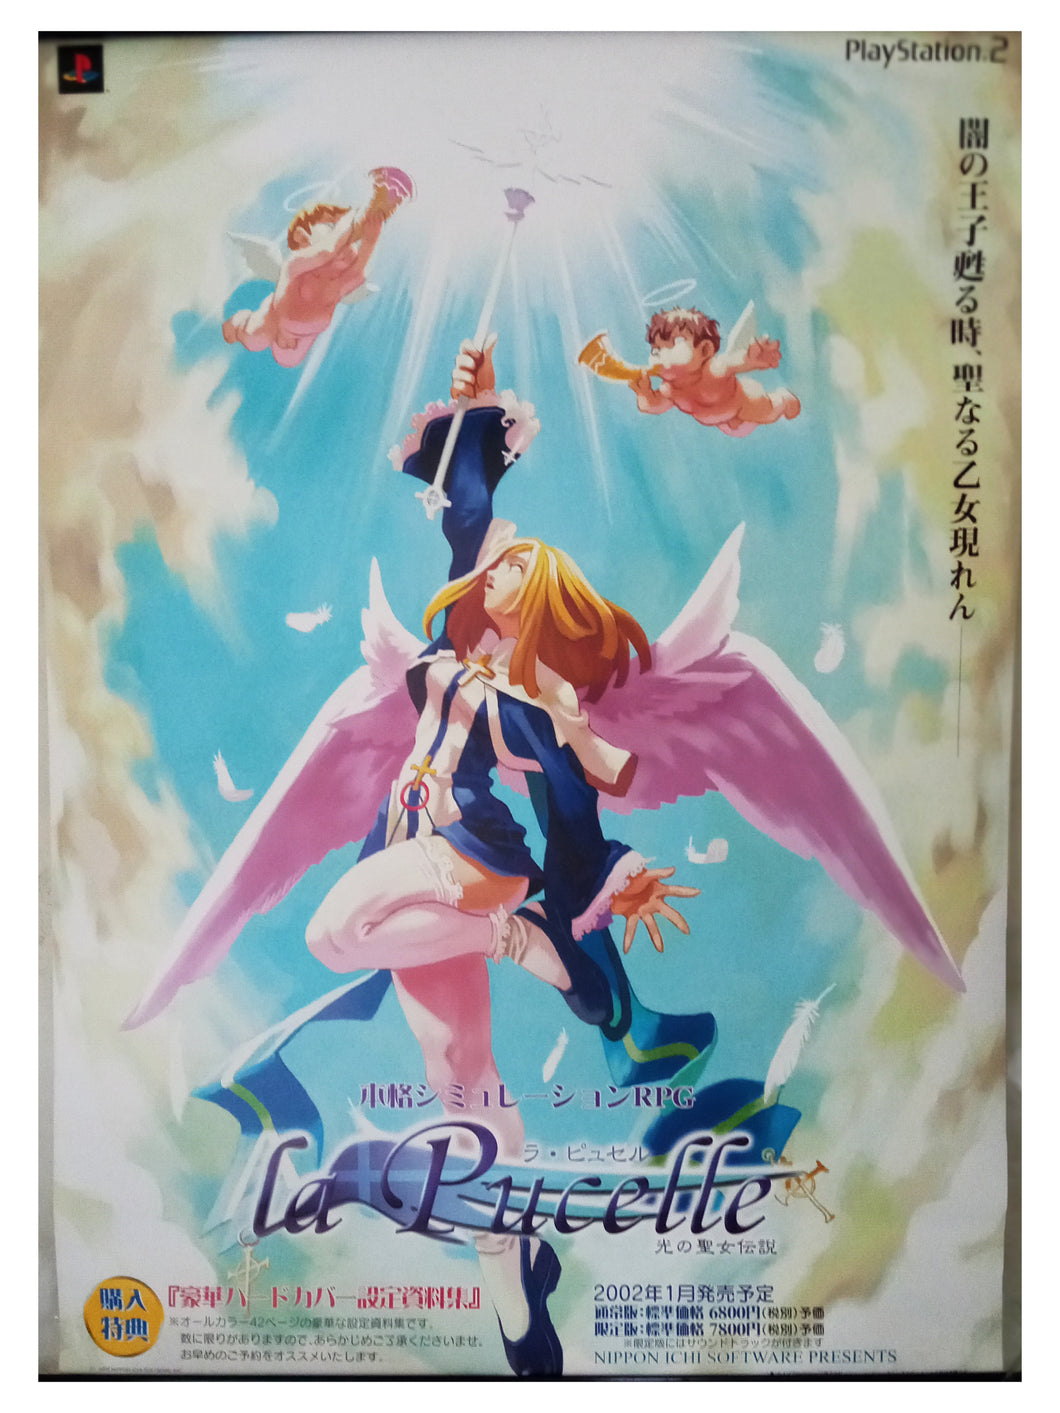 La Pucelle: The Legend of the Holy Lady of Light - Game Poster Promotional - PS2 (Nippon Ichi Software)